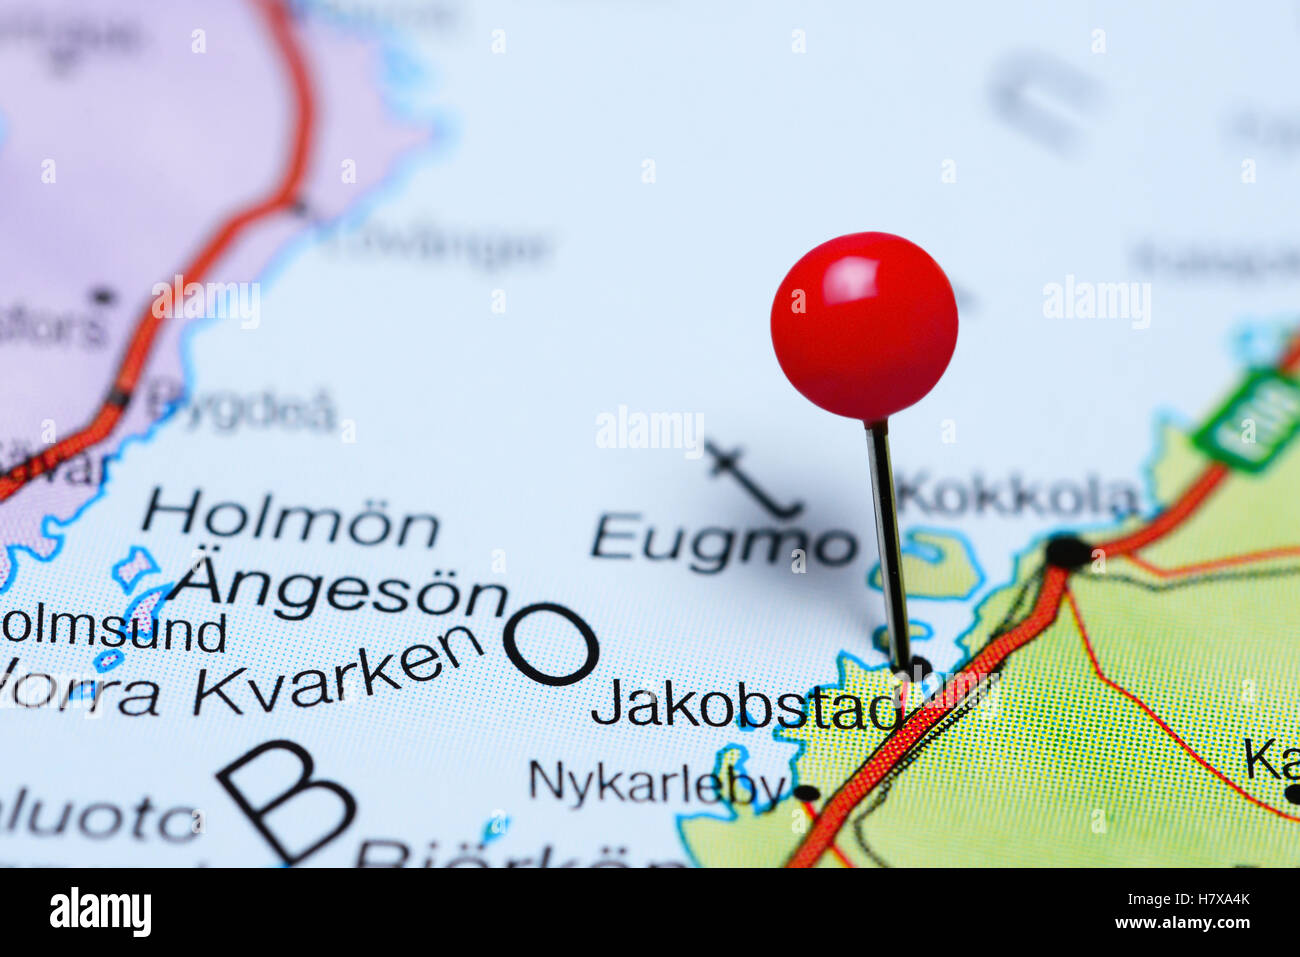 Jakobstad pinned on a map of Finland Stock Photo